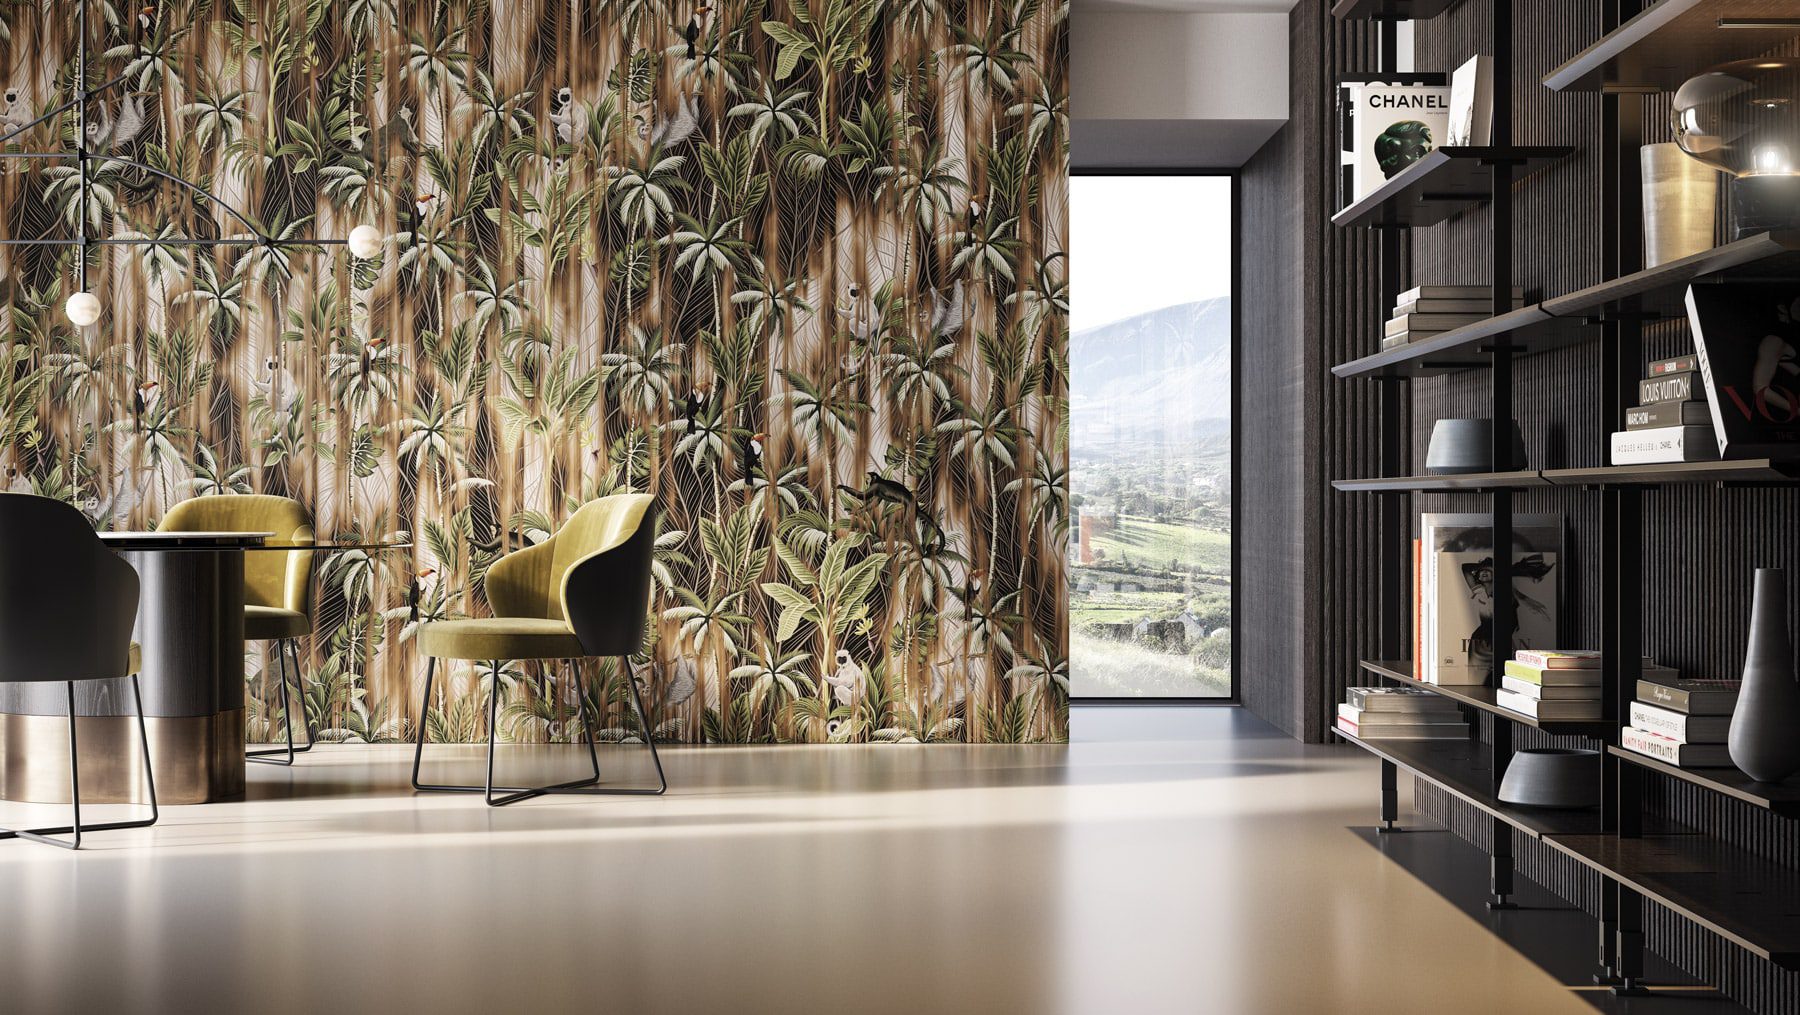 The Nature Wallpaper Instabilelab is designed with Style, the beauty of nature for interior design. Discover the exclusive collection.